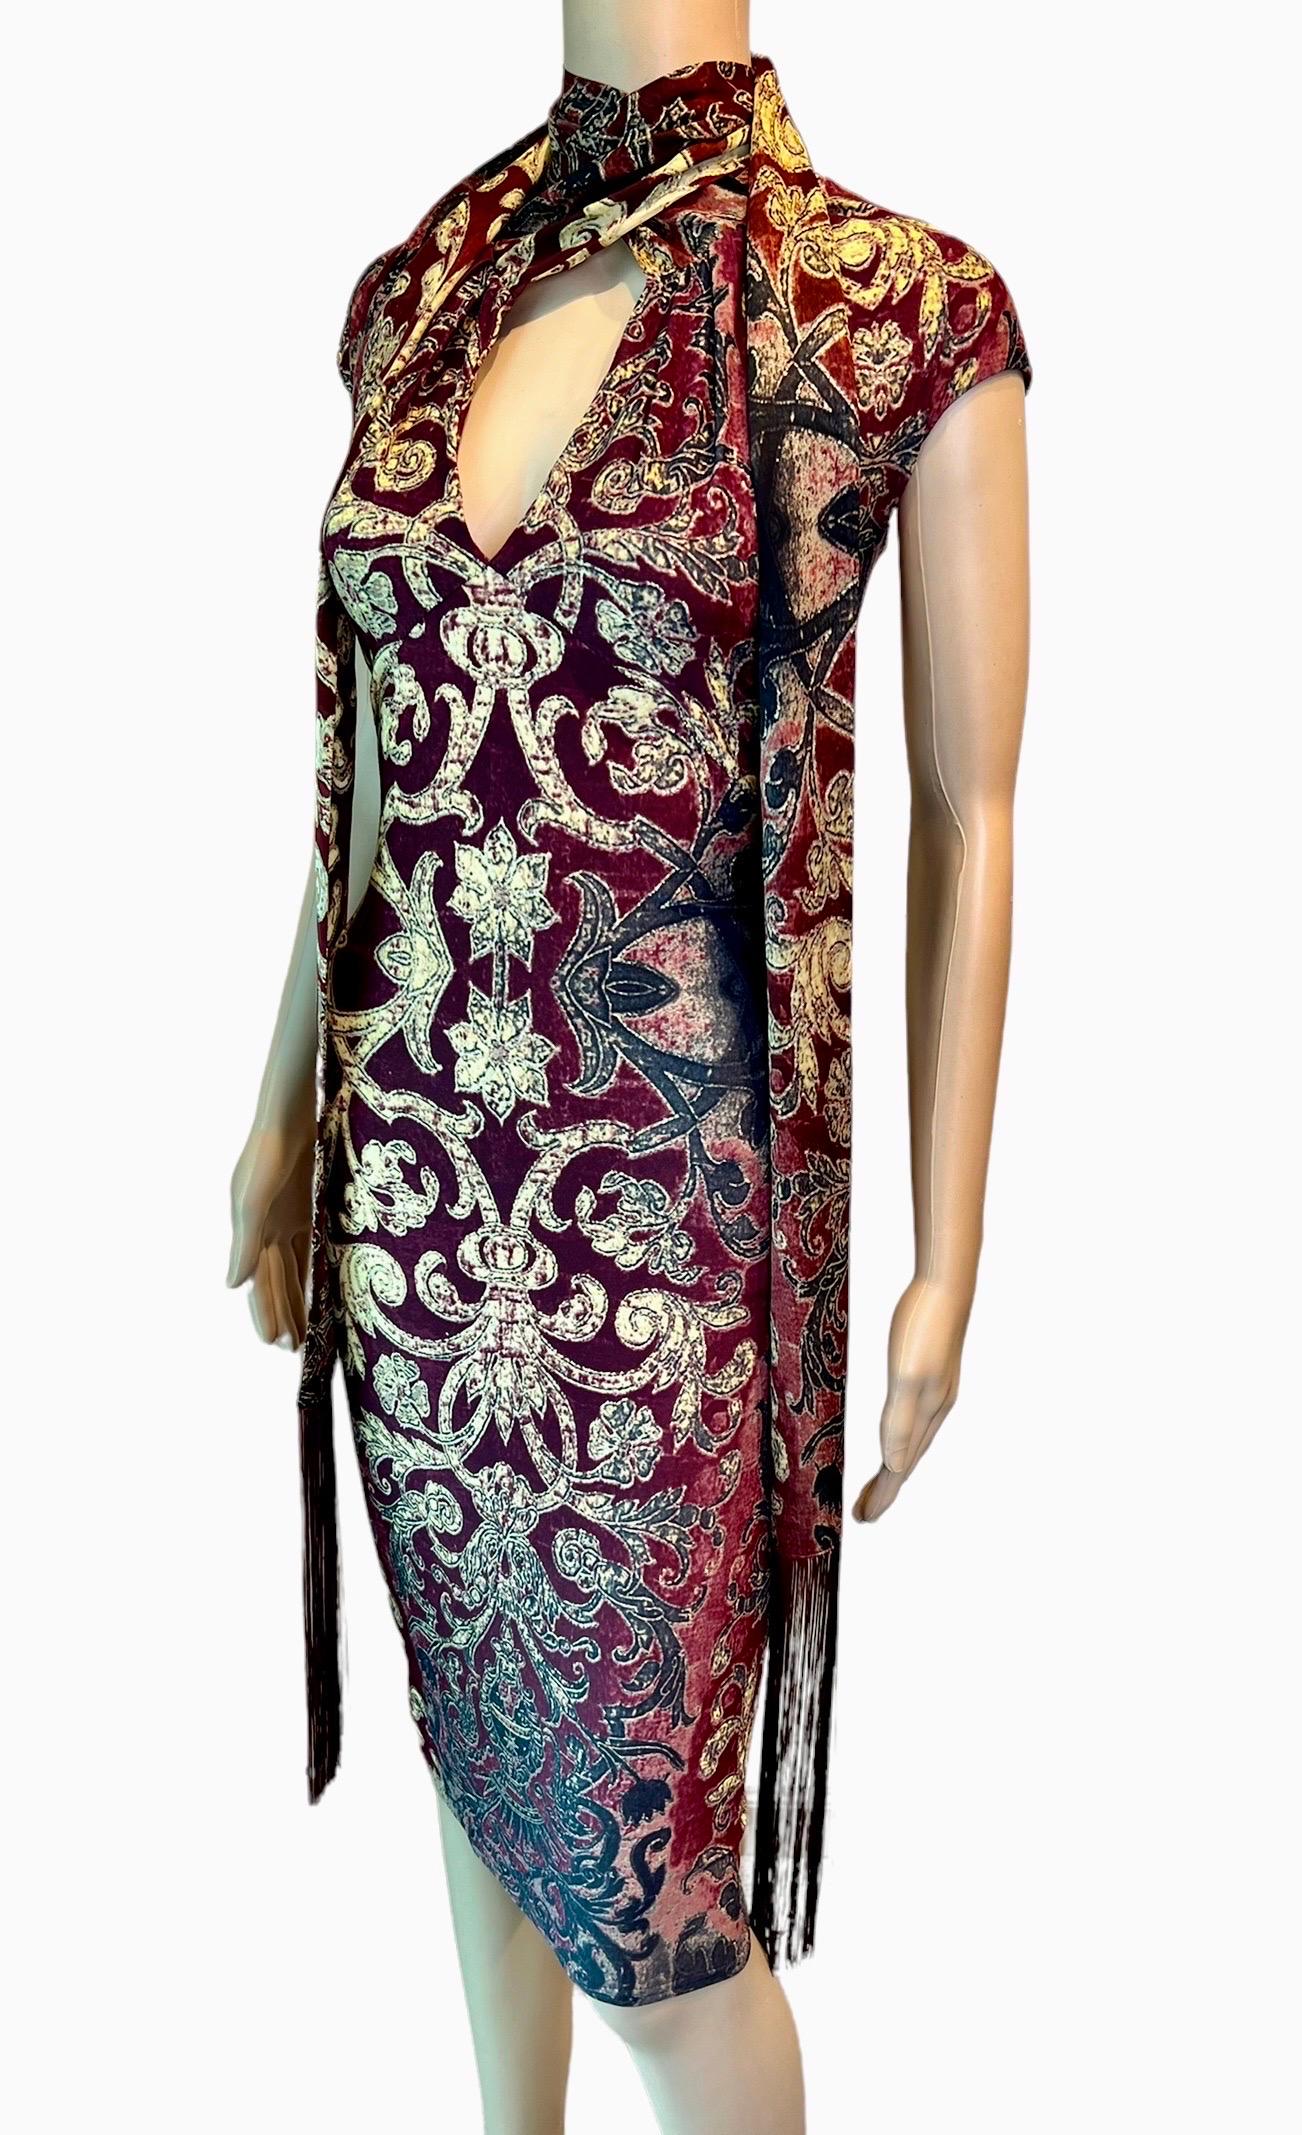 Roberto Cavalli F/W 2004 Runway Red Gold Brocade Print Bodycon Fringe Scarf Print Dress Size S

Look 5 from the Fall 2004 Collection.